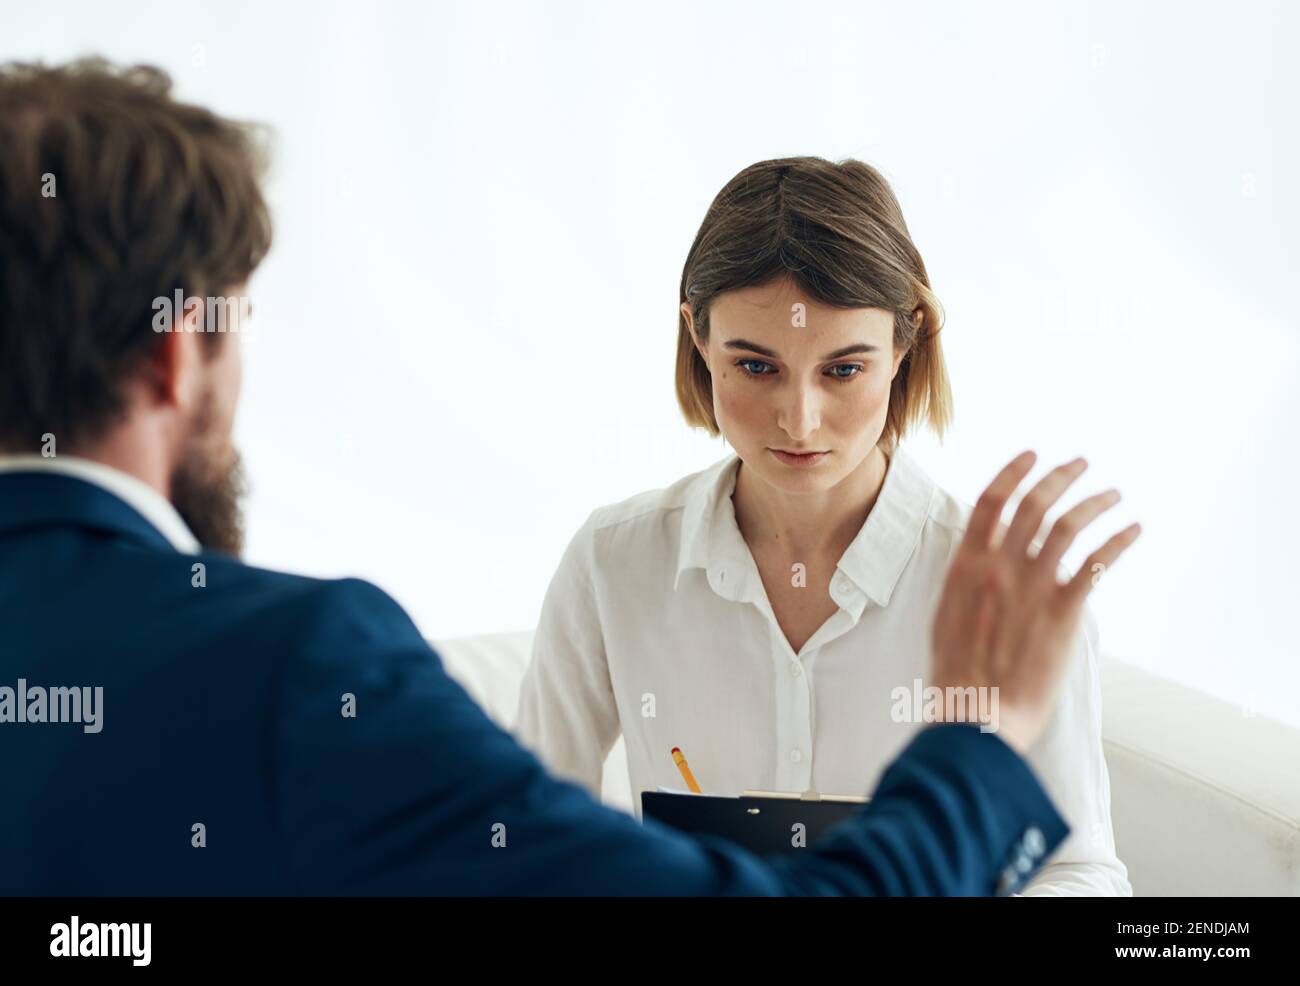 woman and man suit documents communication resume Stock Photo